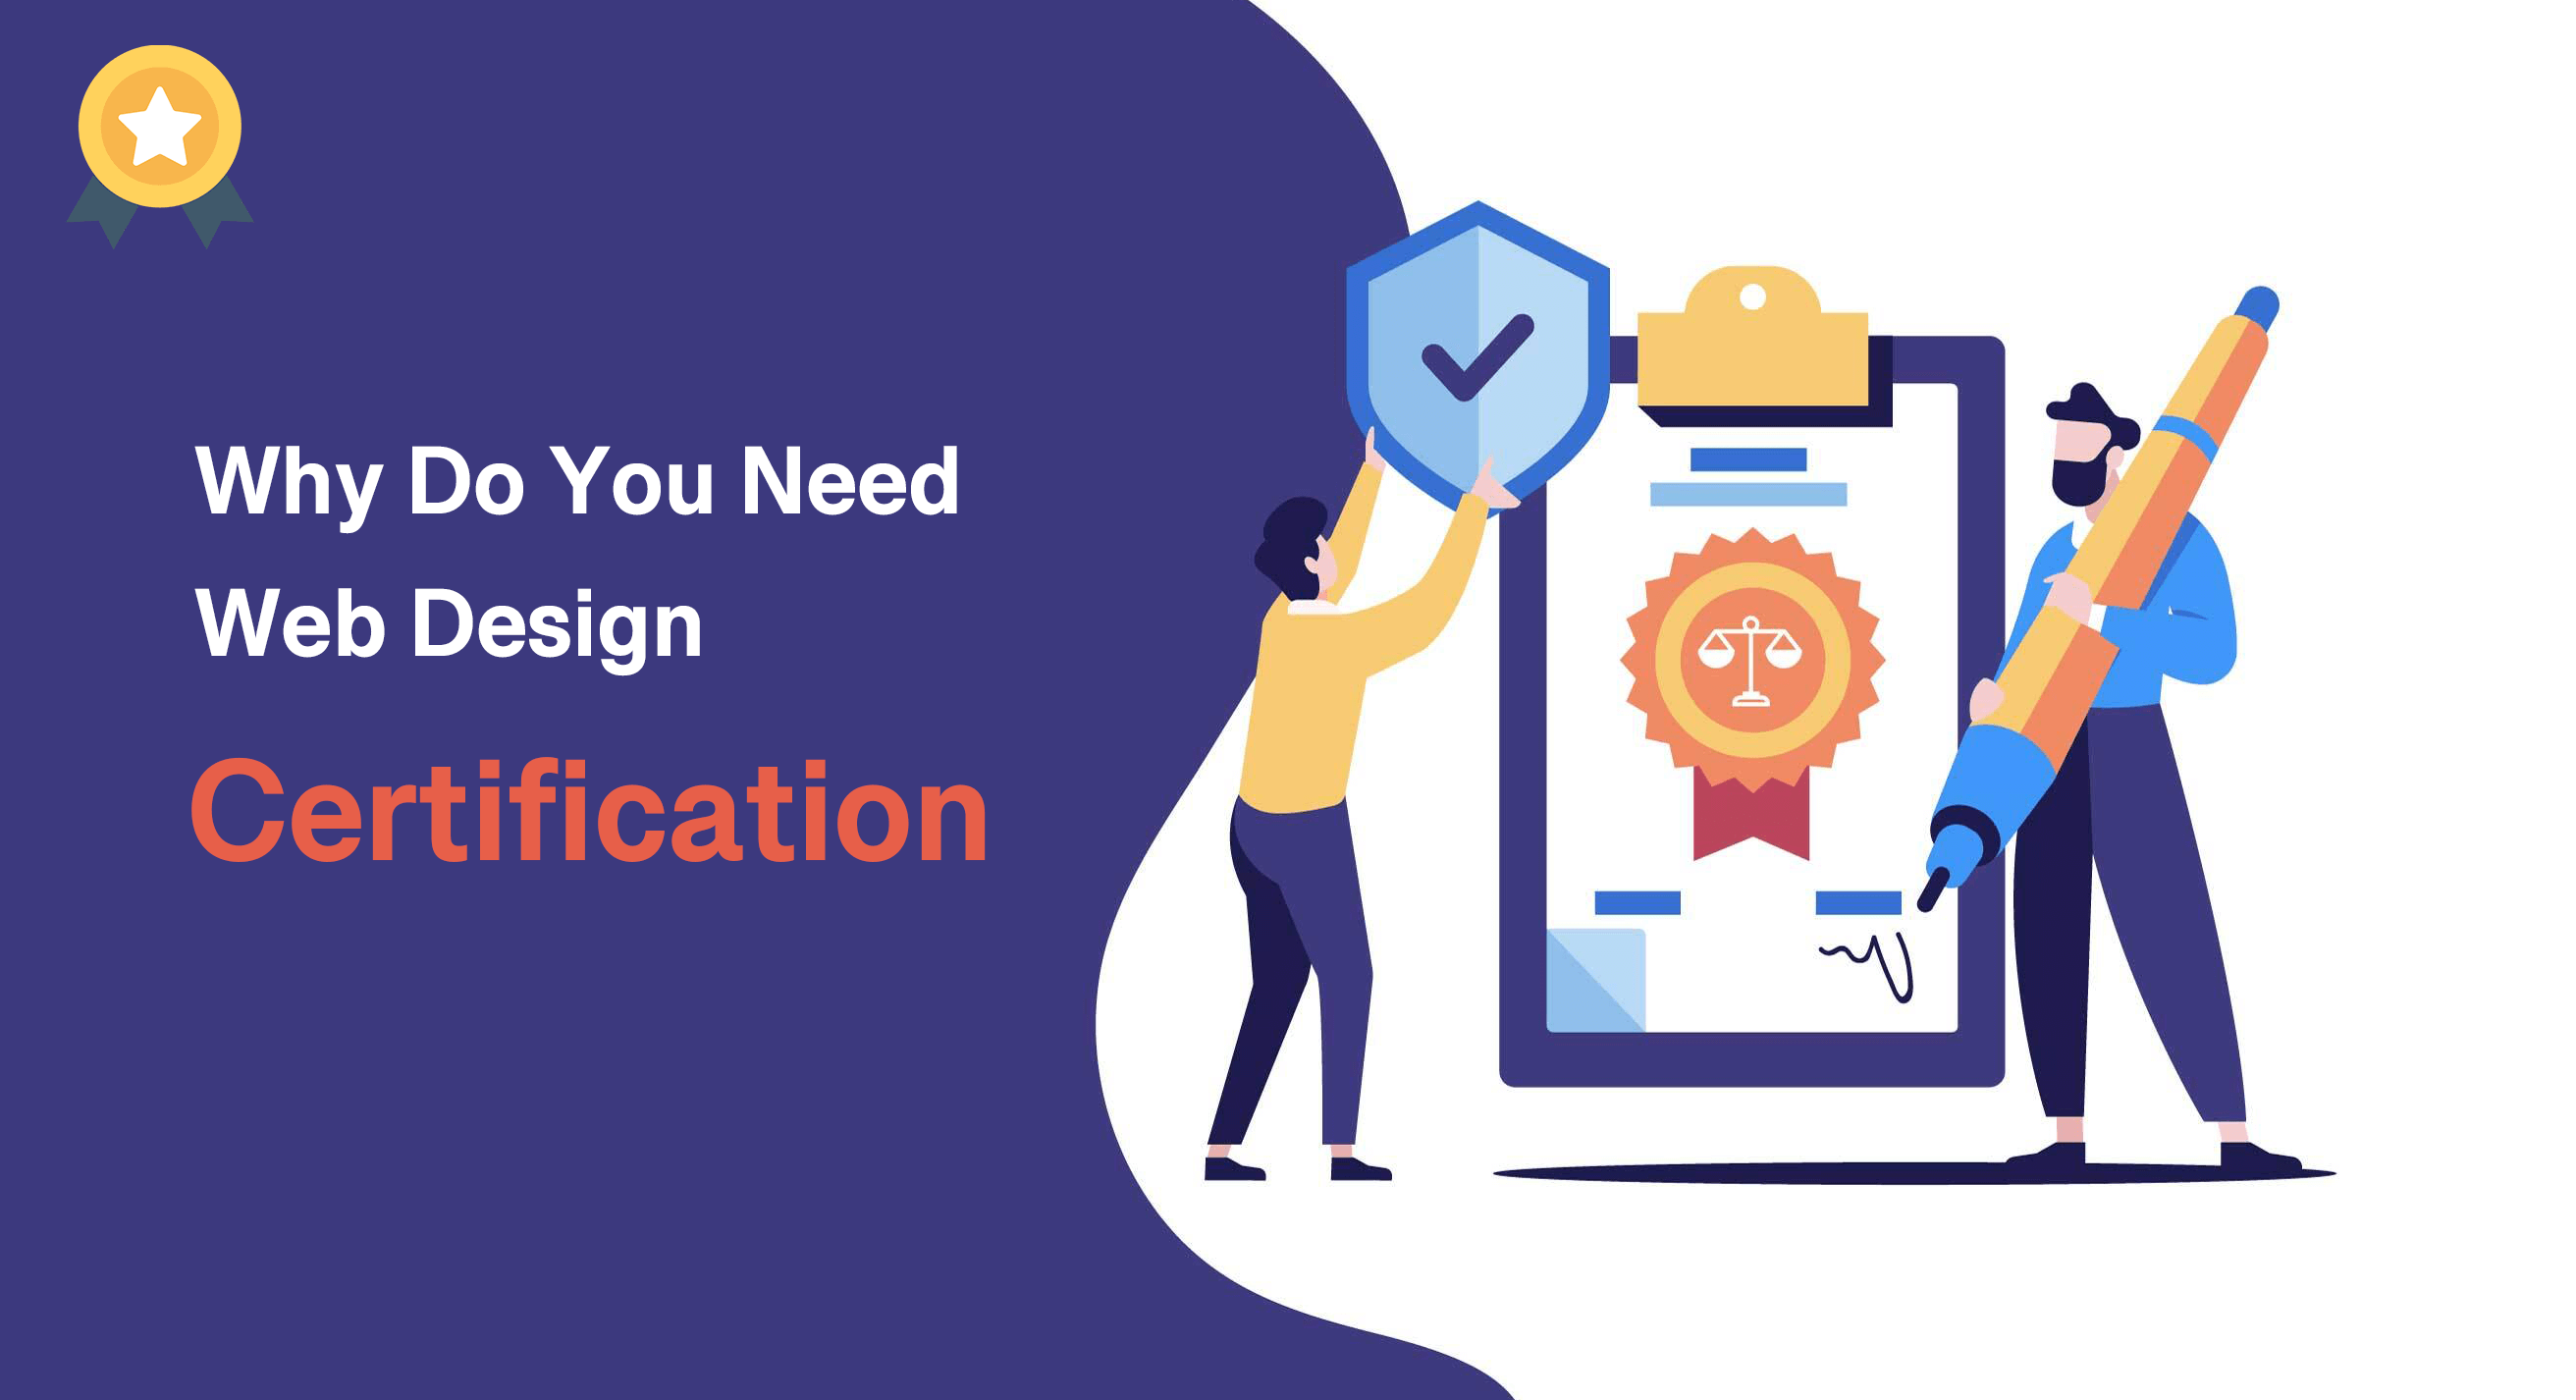 Why do you need web design certification